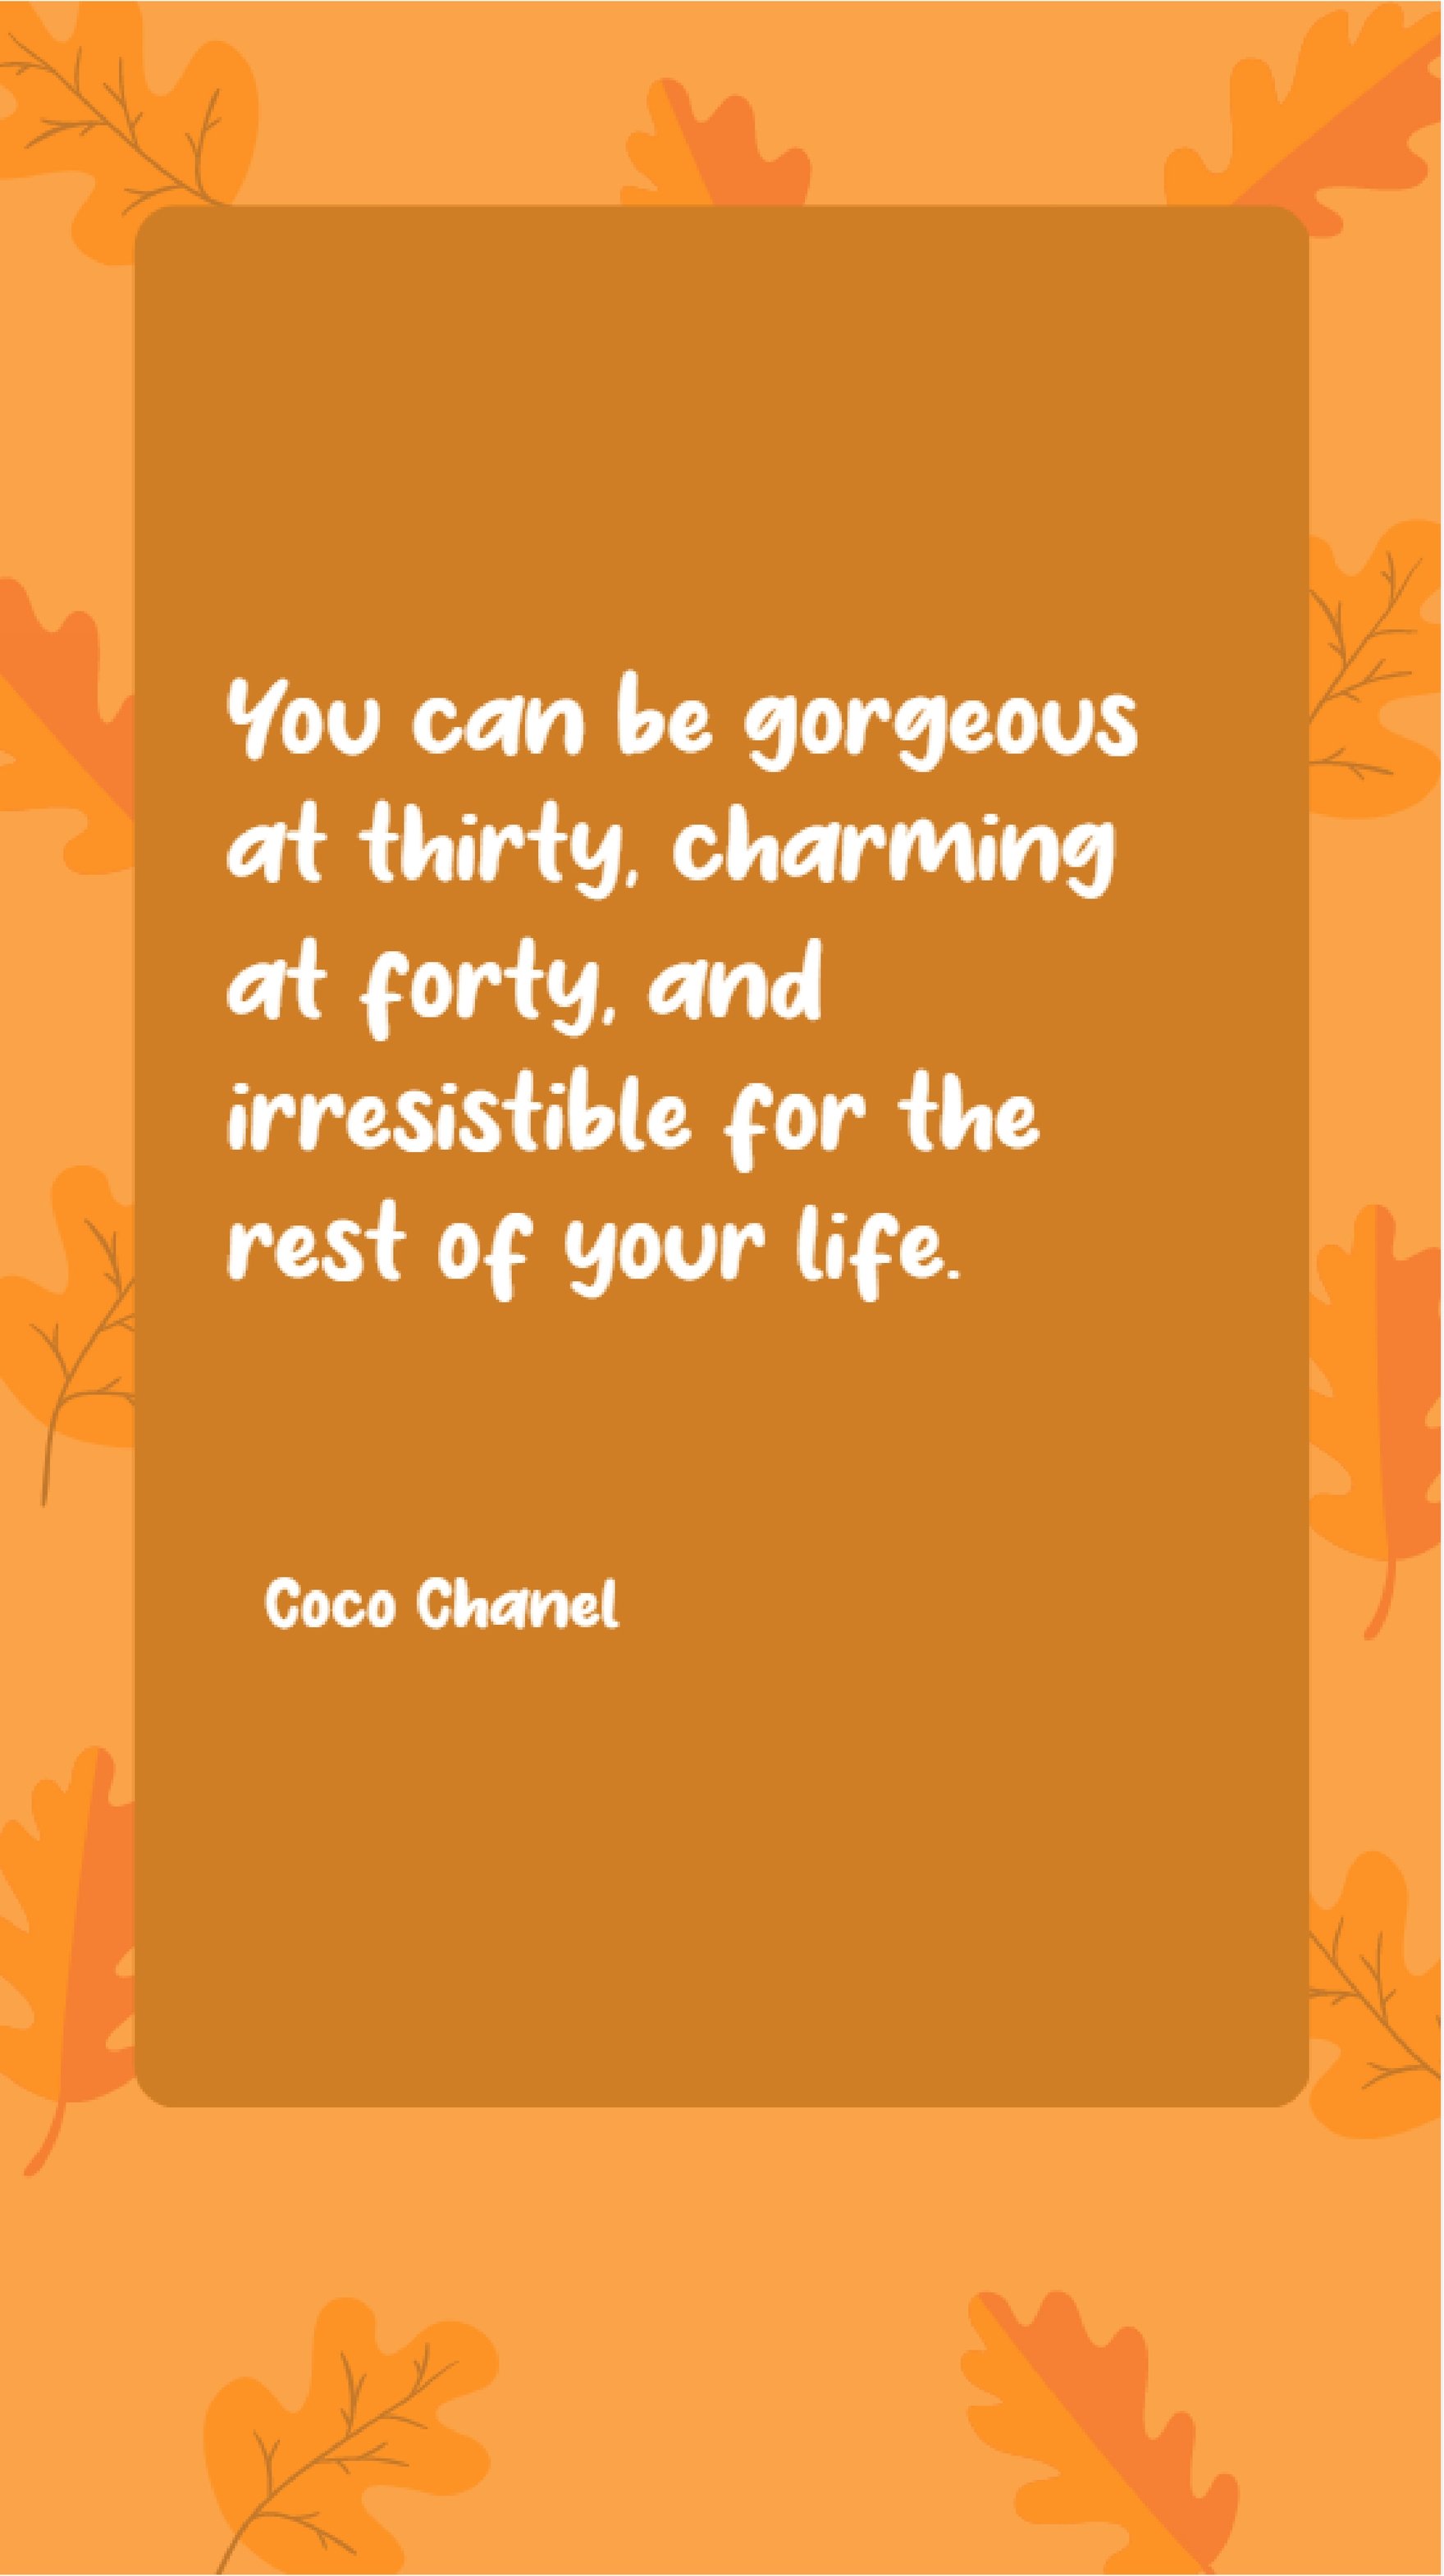 Coco Chanel - “You can be gorgeous at thirty, charming at forty, and irresistible for the rest of your life.”